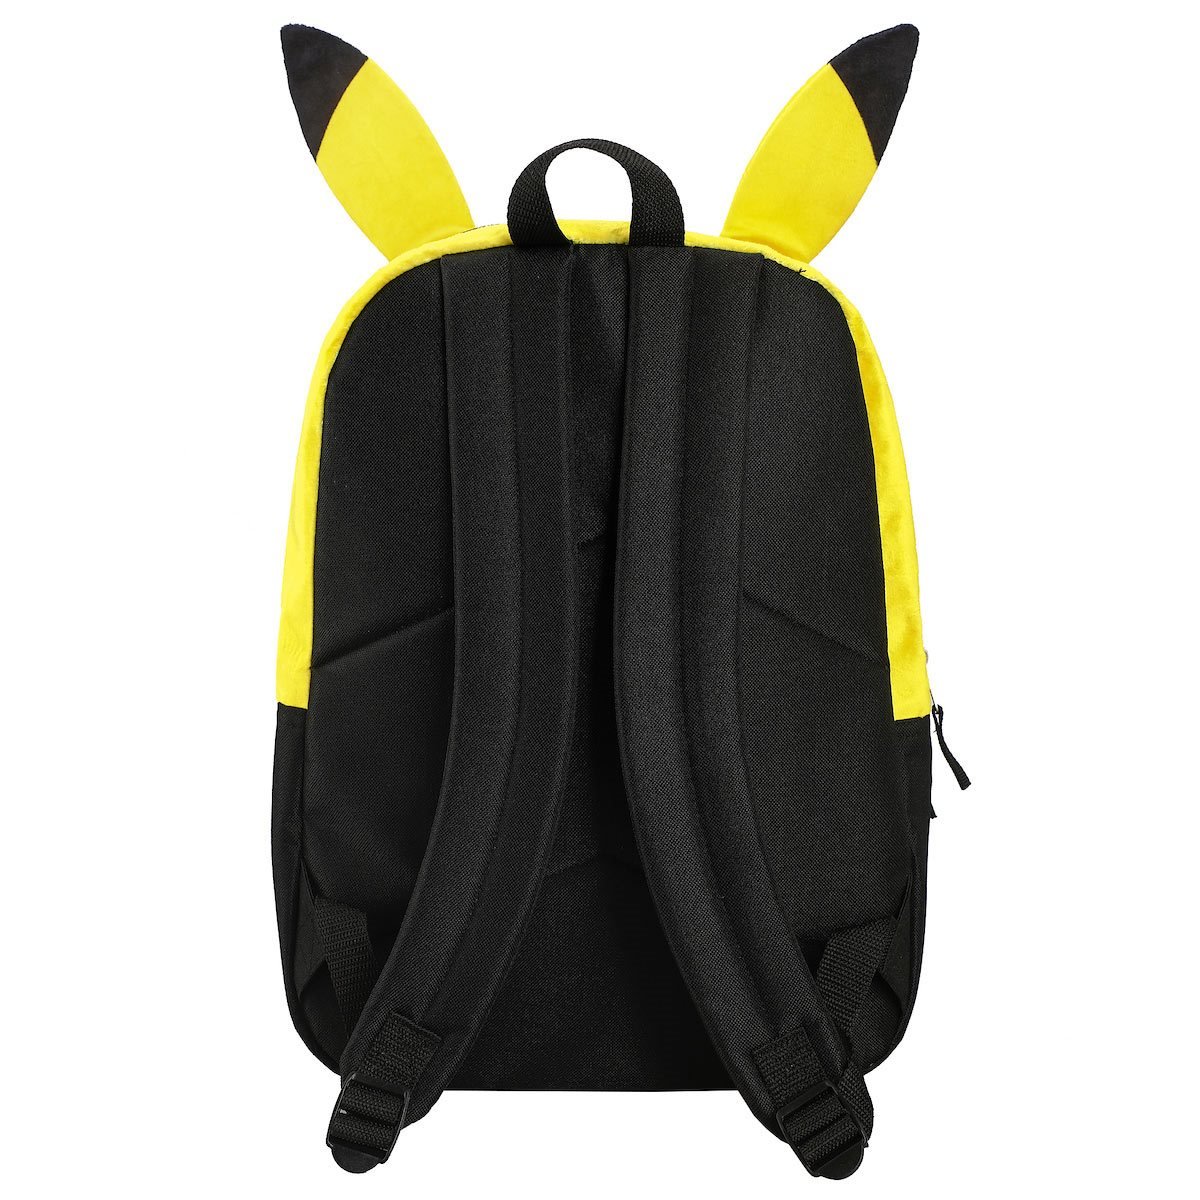 Pikachu backpack from 1999. : r/nostalgia